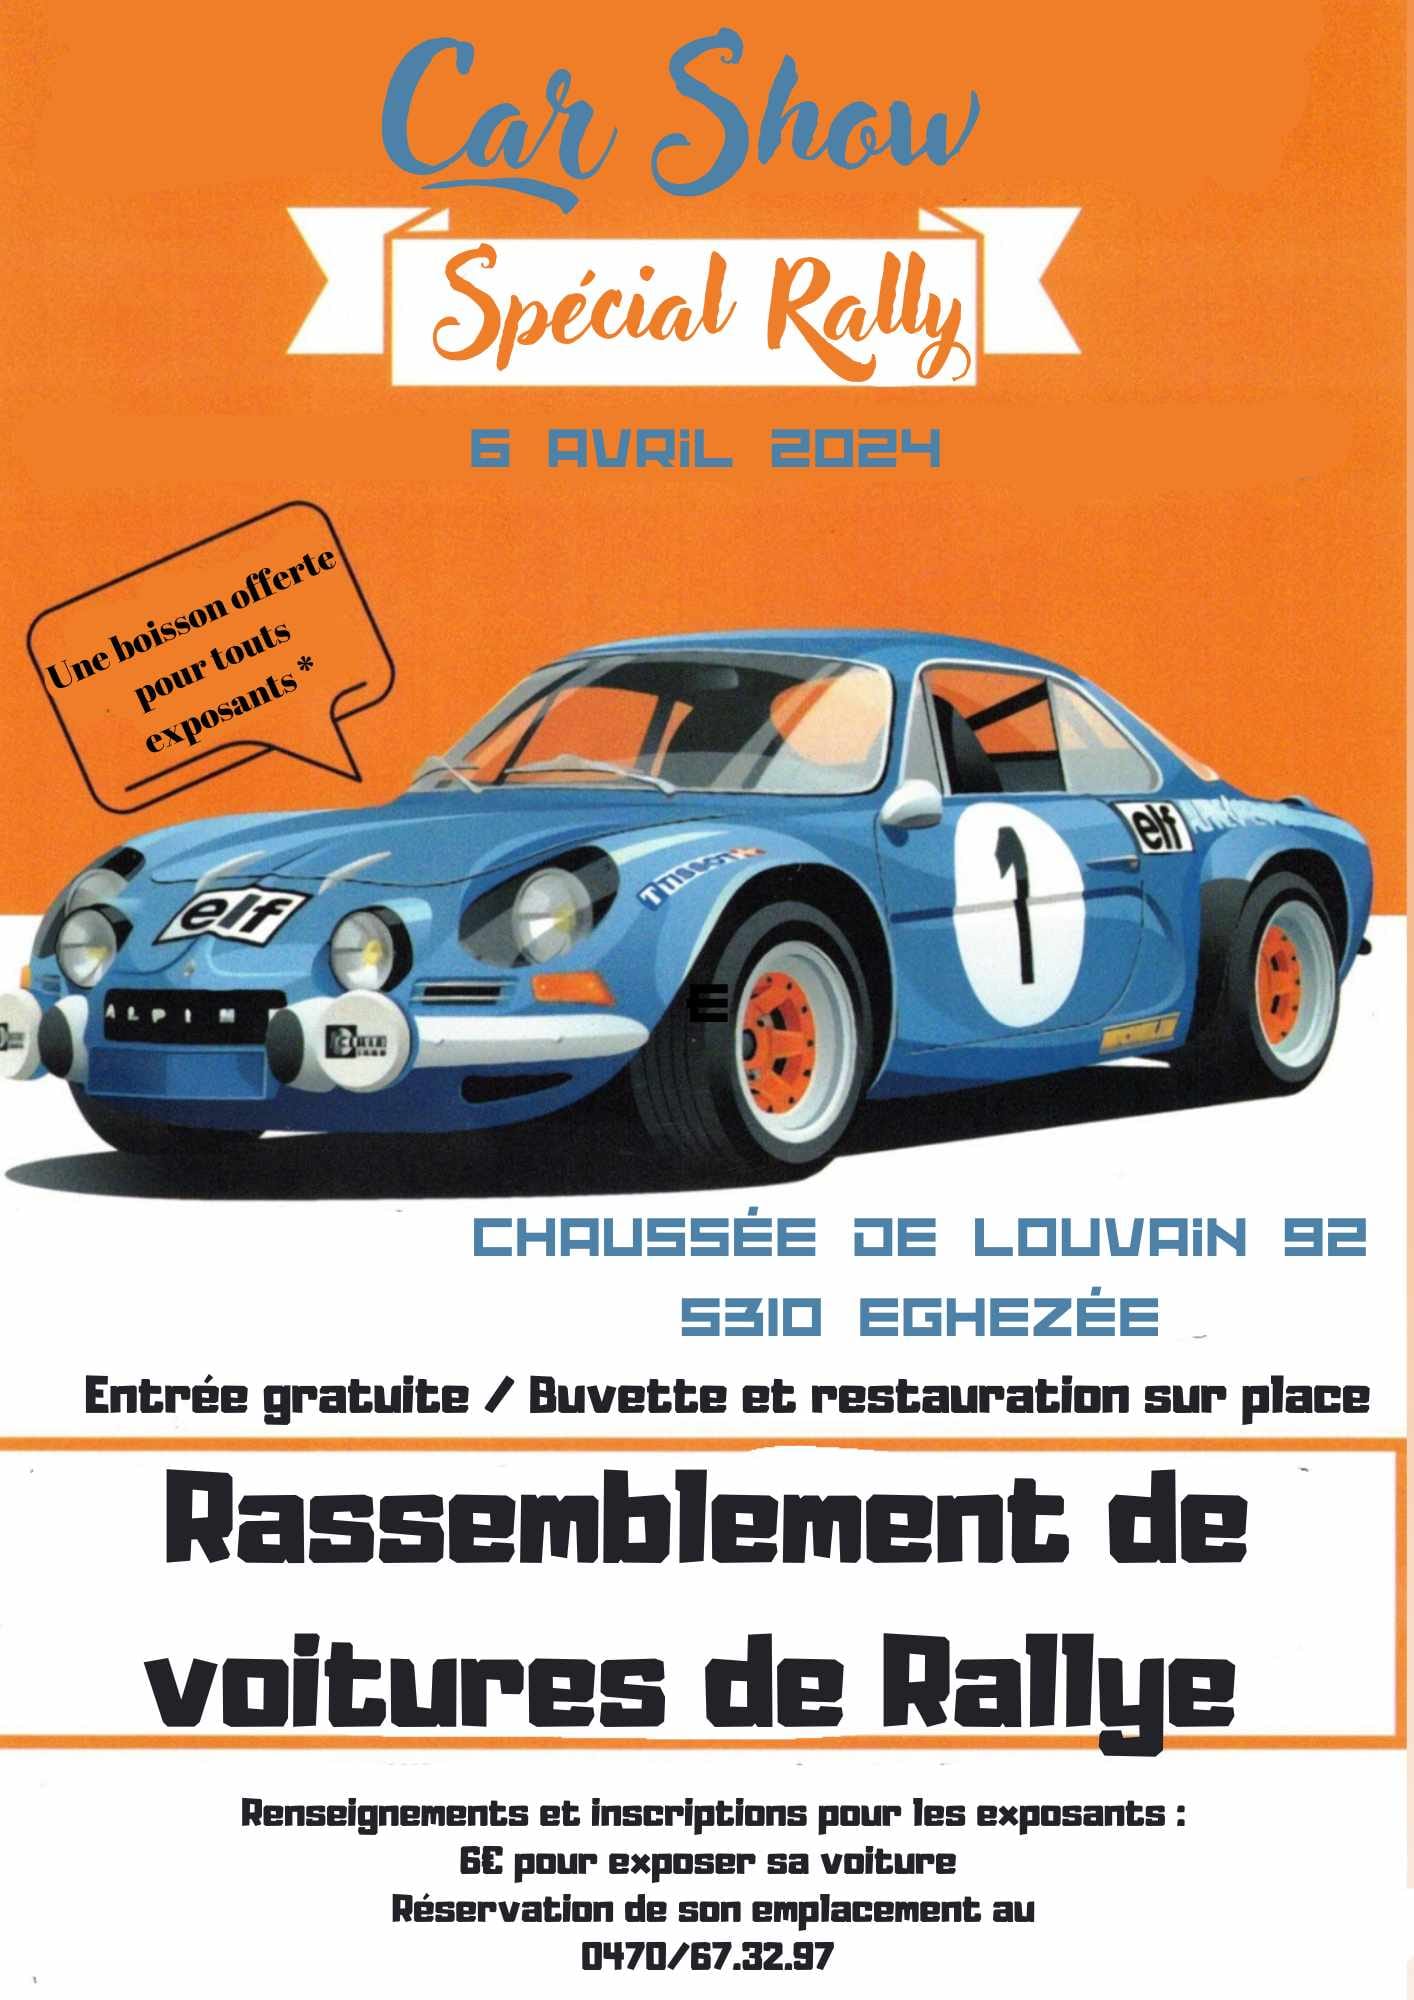 affiche deCar Show - Special Rally